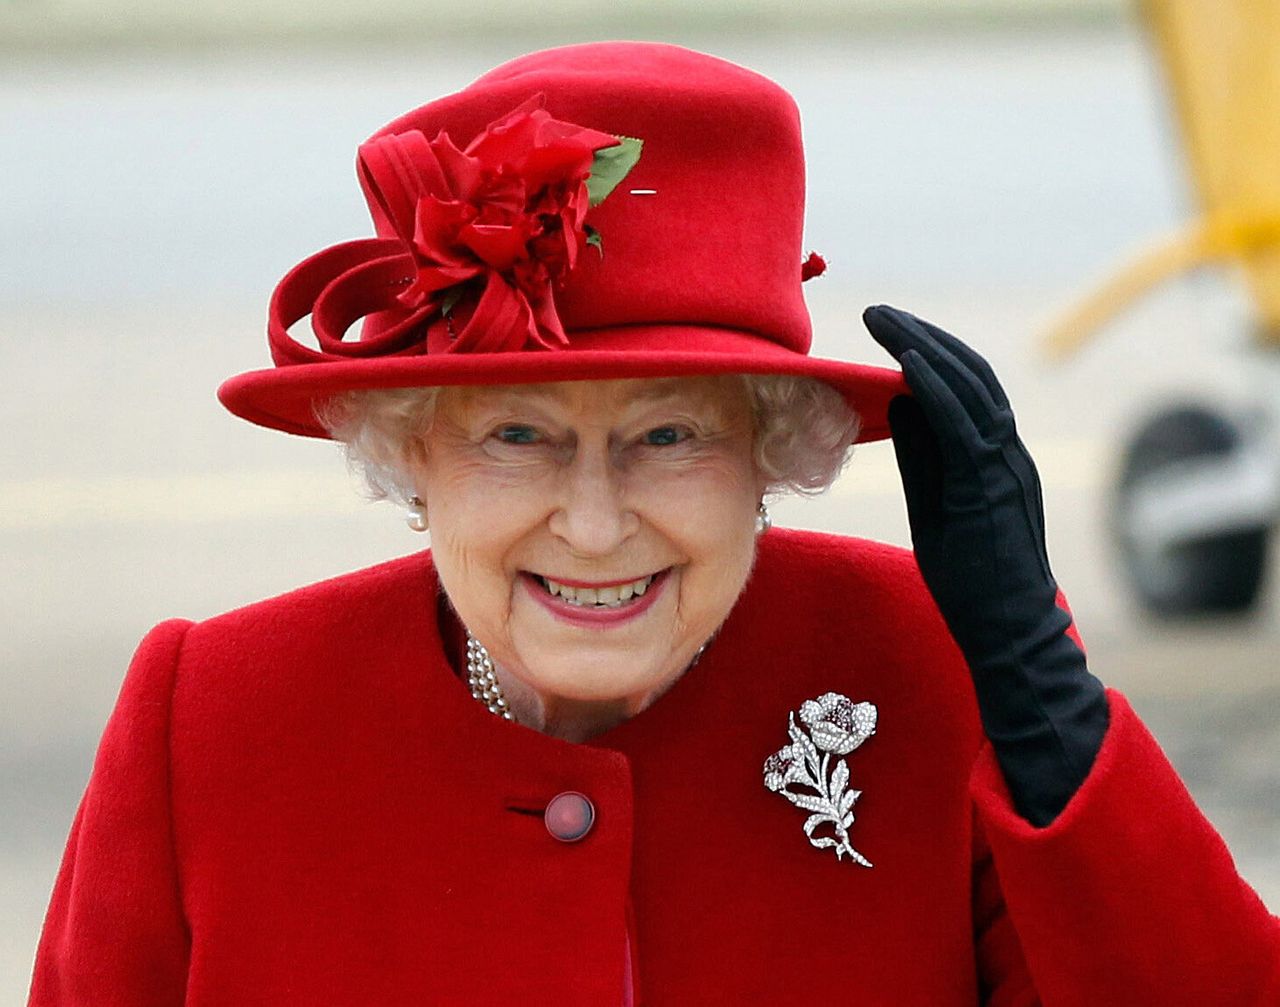 Queen Elizabeth II holds on to her hat in high winds as she arrives for a visit to RAF Valley in Anglesey, Wales on April 1, 2011.